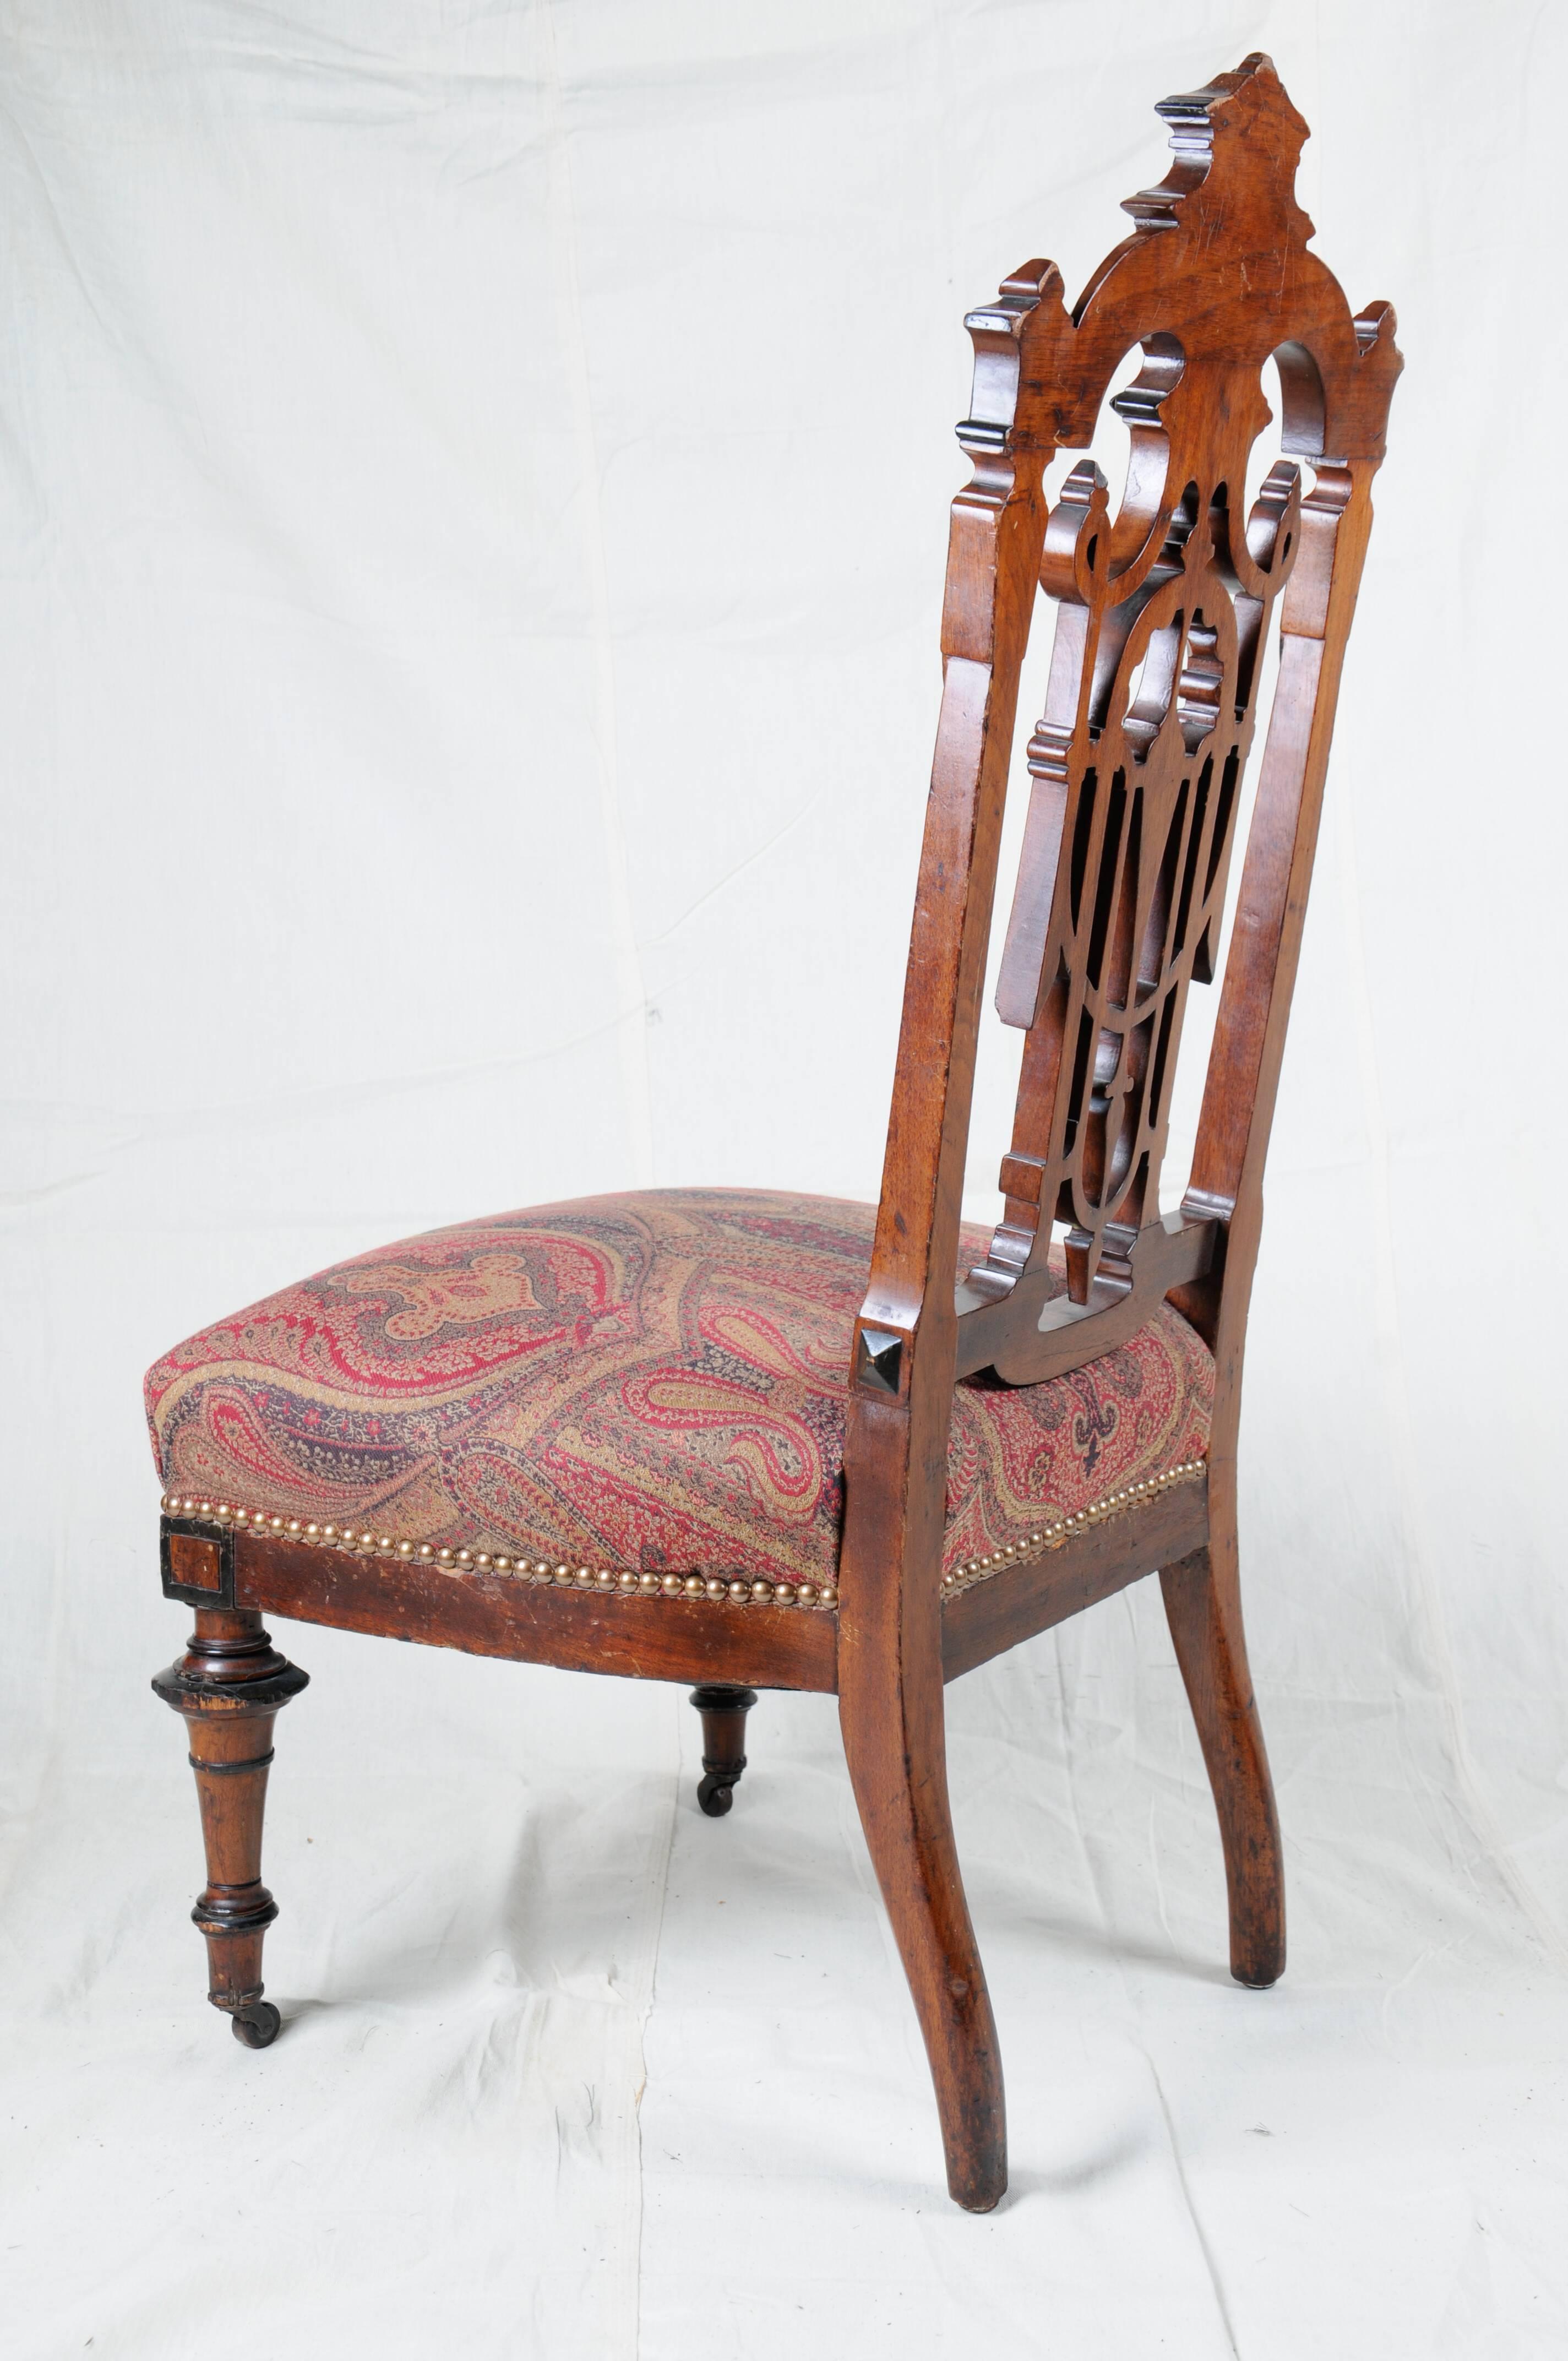 Aesthetic period chair, circa 1880.
Purchased in New Orleans the 1980s.
It has original casters on front legs, the upholstery finished off with brass nailheads. Hand tided springs. The chair has ebonized accents.

Size: 40.25